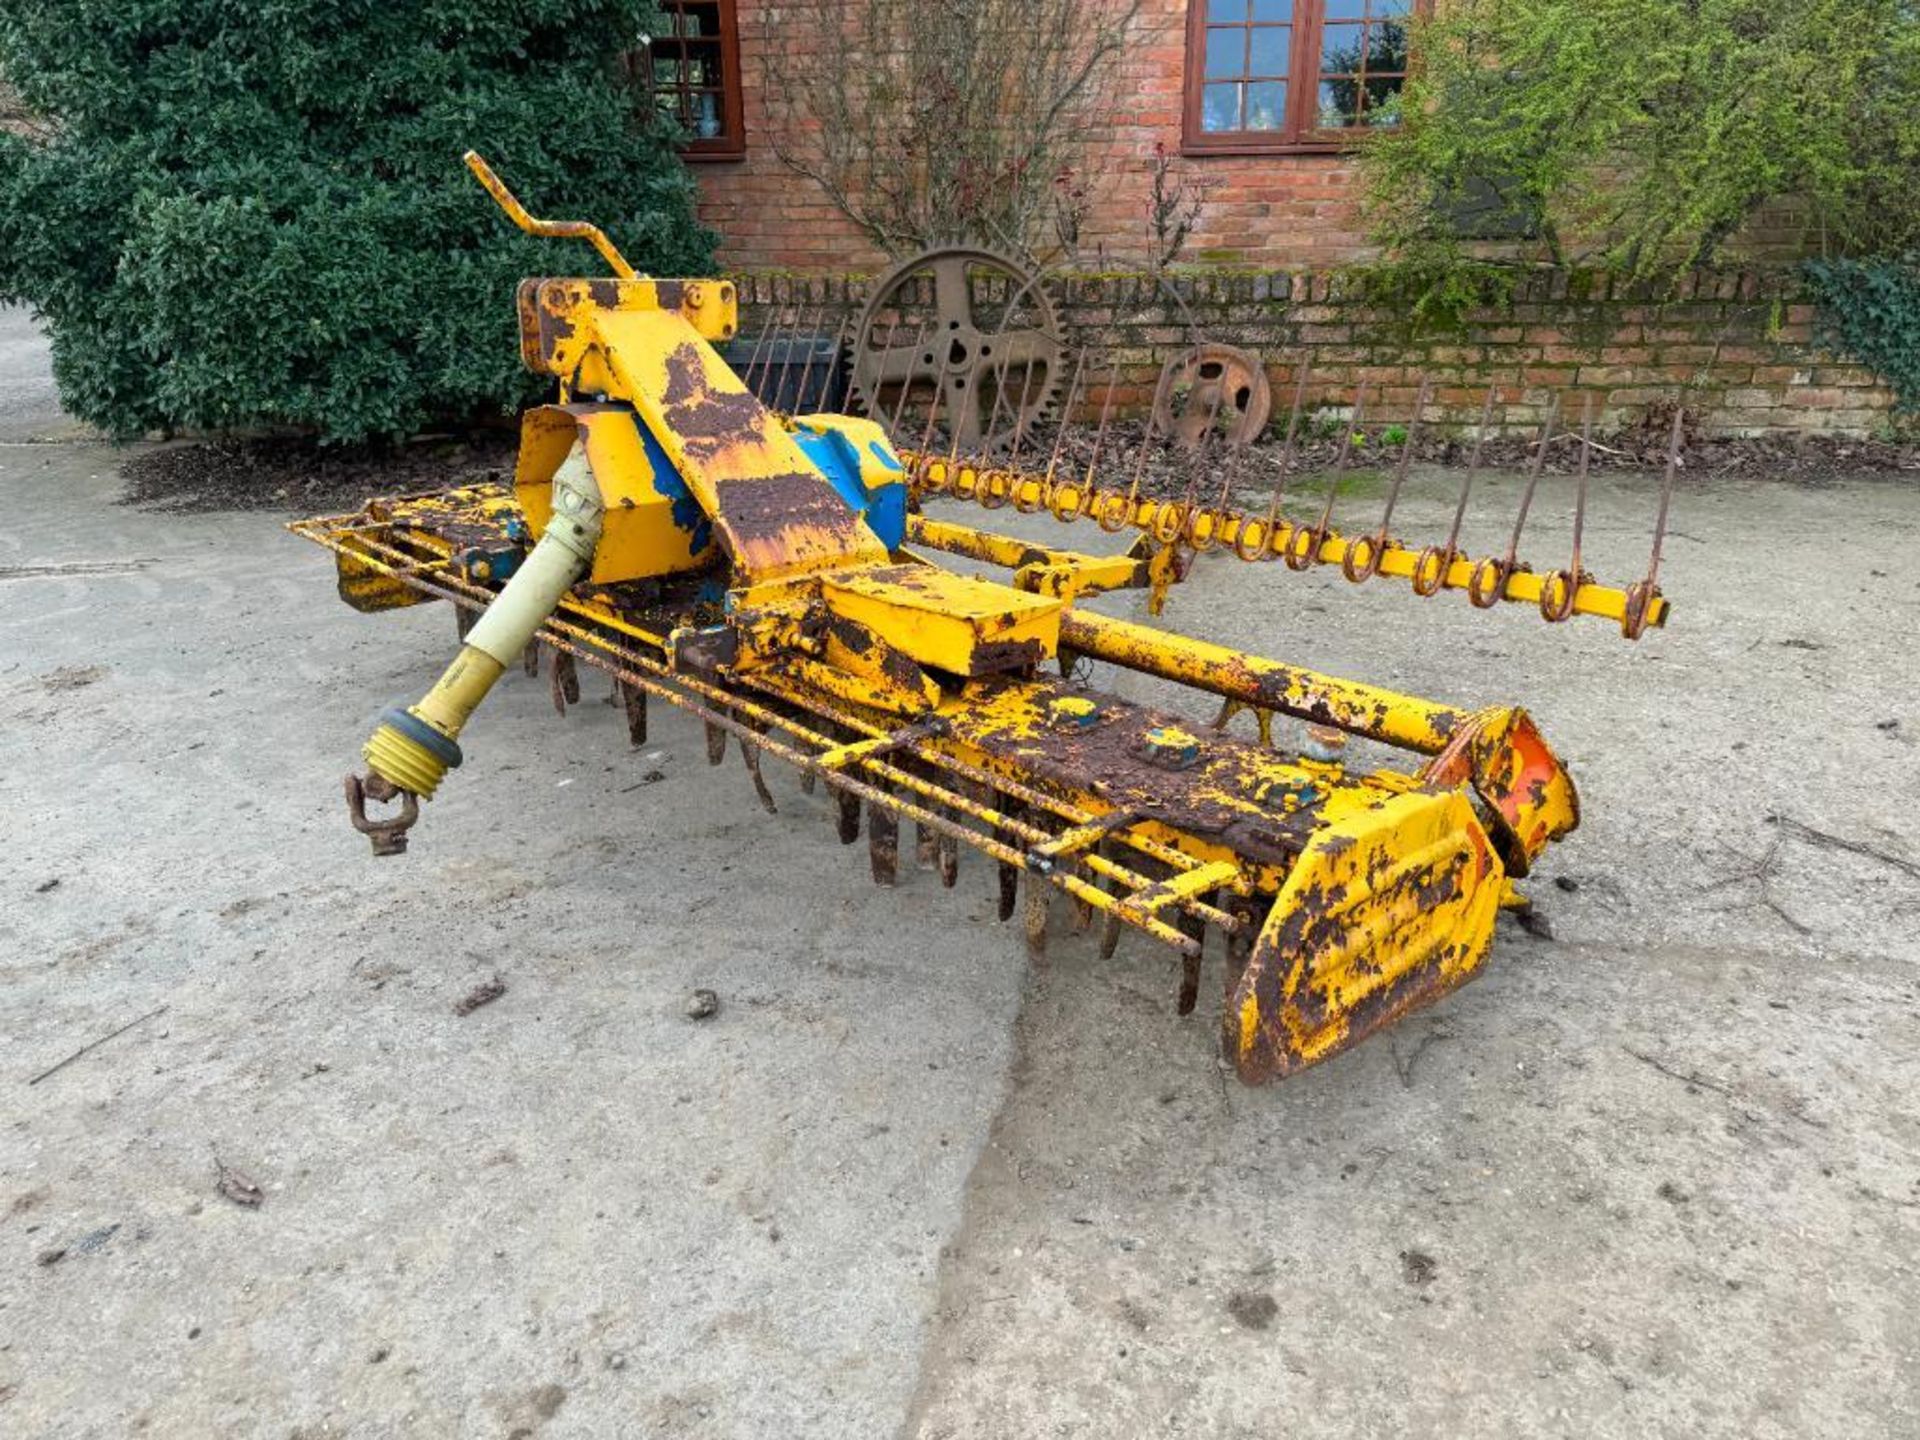 Falc 3m power harrow with rear crumbler roller, linkage mounted - Image 2 of 9